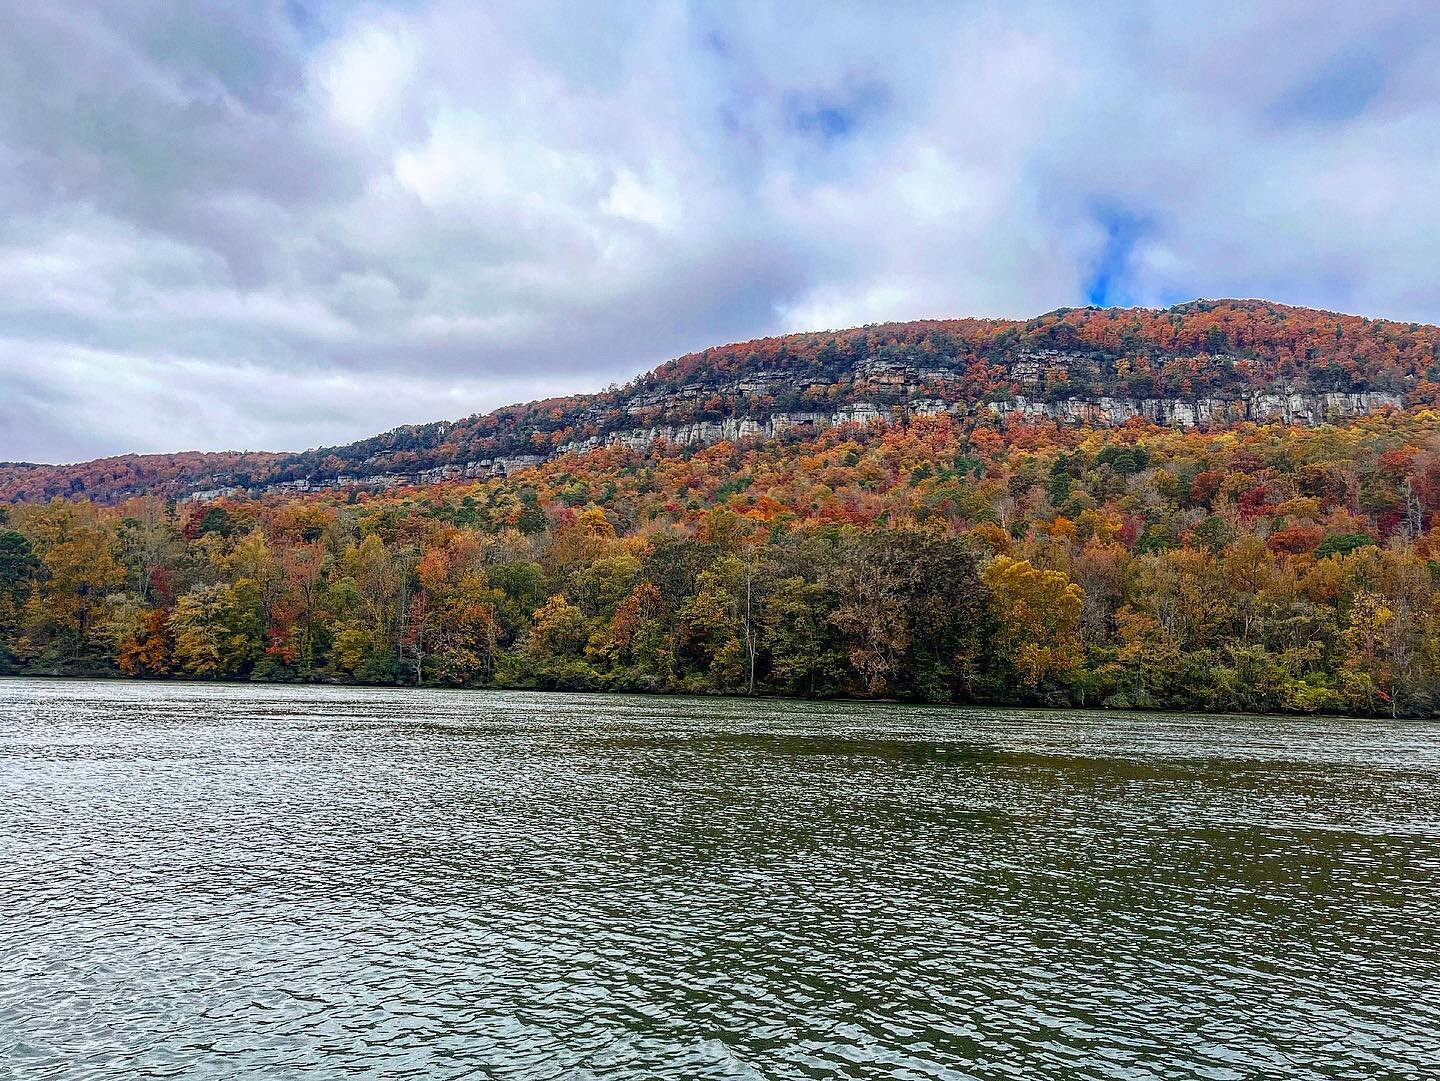 Peak season is here 🍁🍁🍁! Come see the beautiful colors this weekend while they last! 

#explorethegorge #fall #fallvibes #fallpictures #fallfoliage #fallcolors #boattour #boatrental #chattanooga #thingstodo #deut31:6